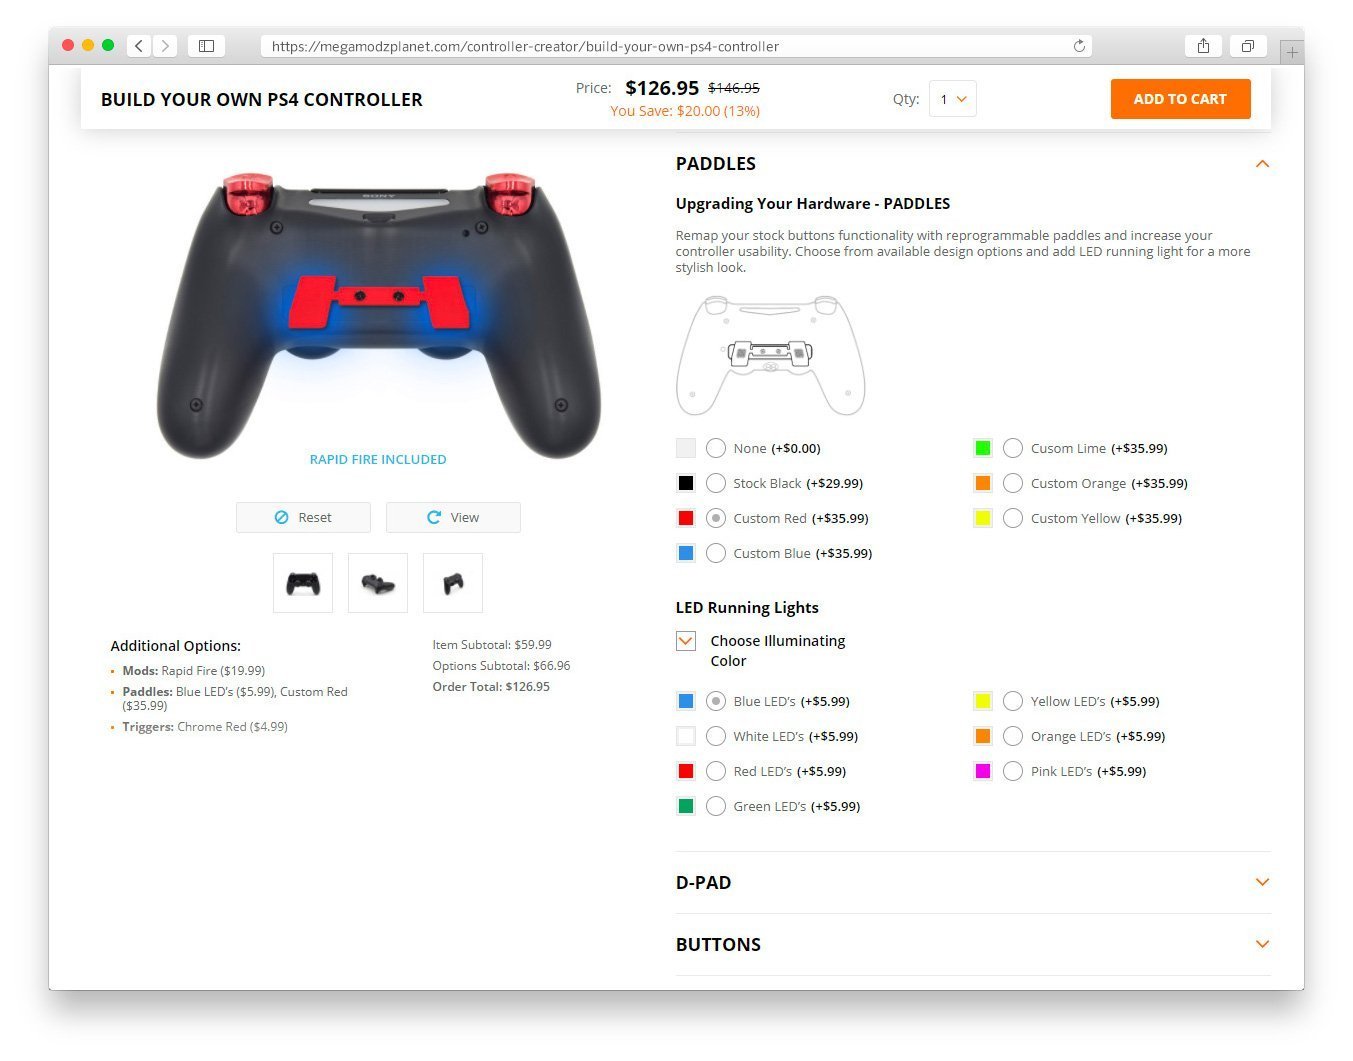 Build Your Own PS4 Screenshot - Custom Controller - Paddles